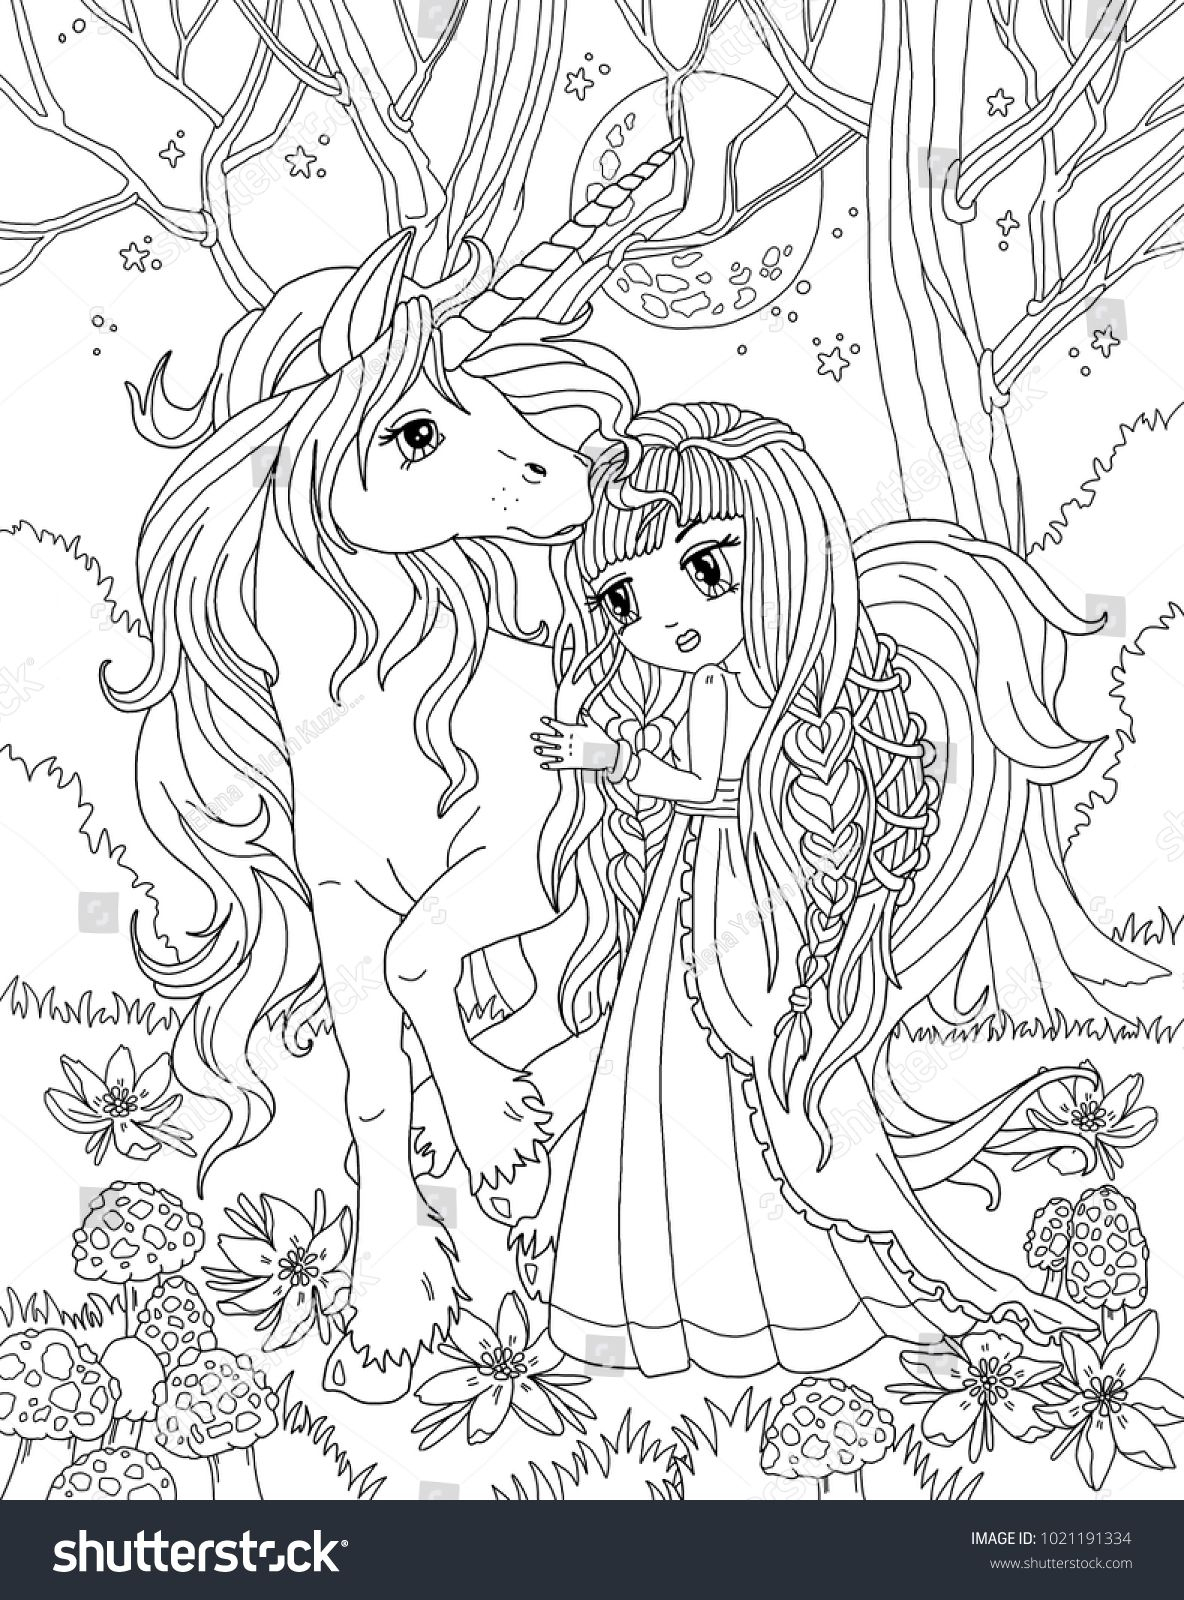 Pin On Coloring 3 tout Coloriage Licorne Sirene